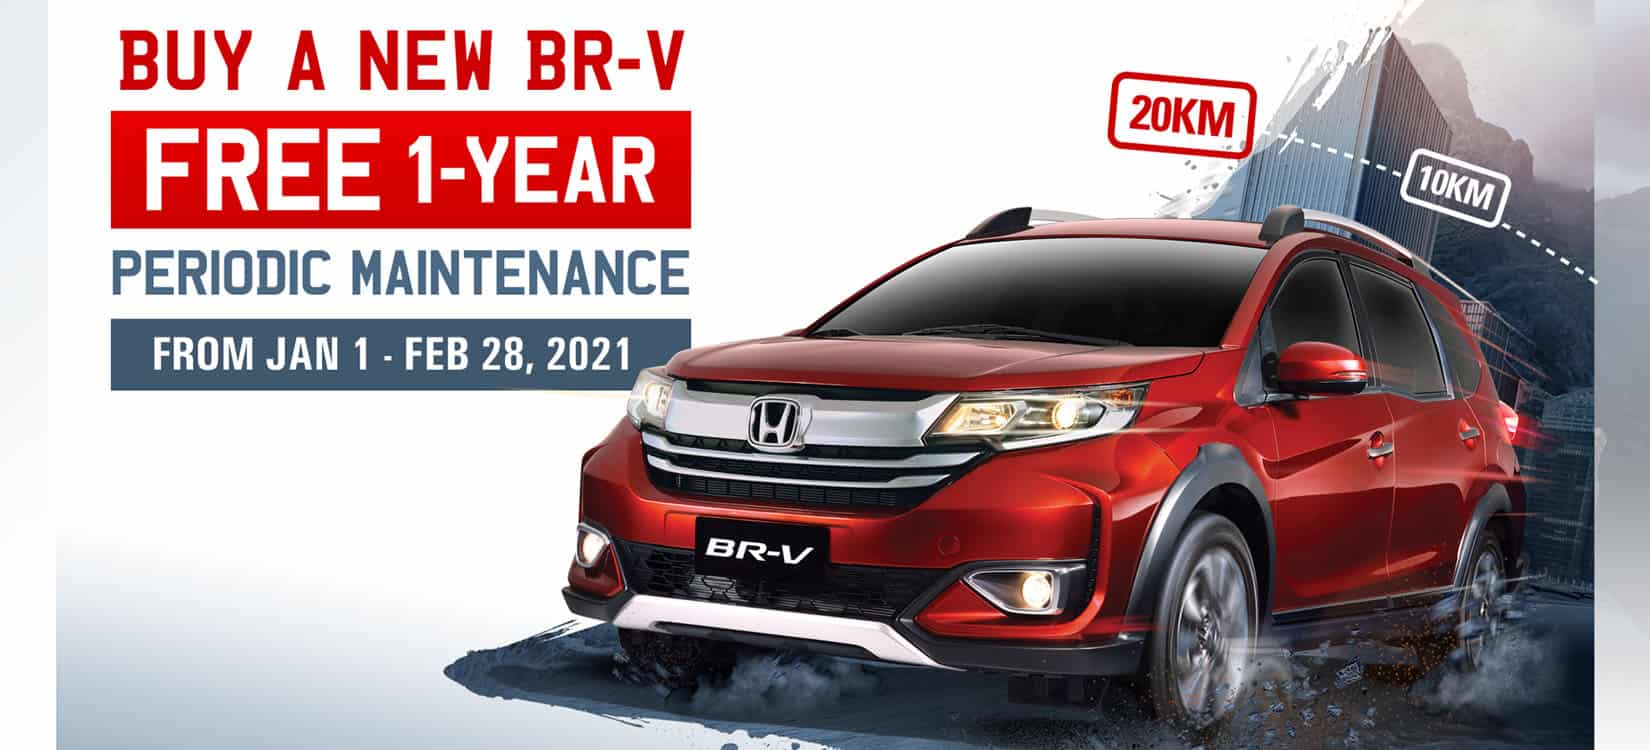 Honda Cars Philippines Honda Offers Free One Year Periodic Maintenance Cash Discount For Br V Customers